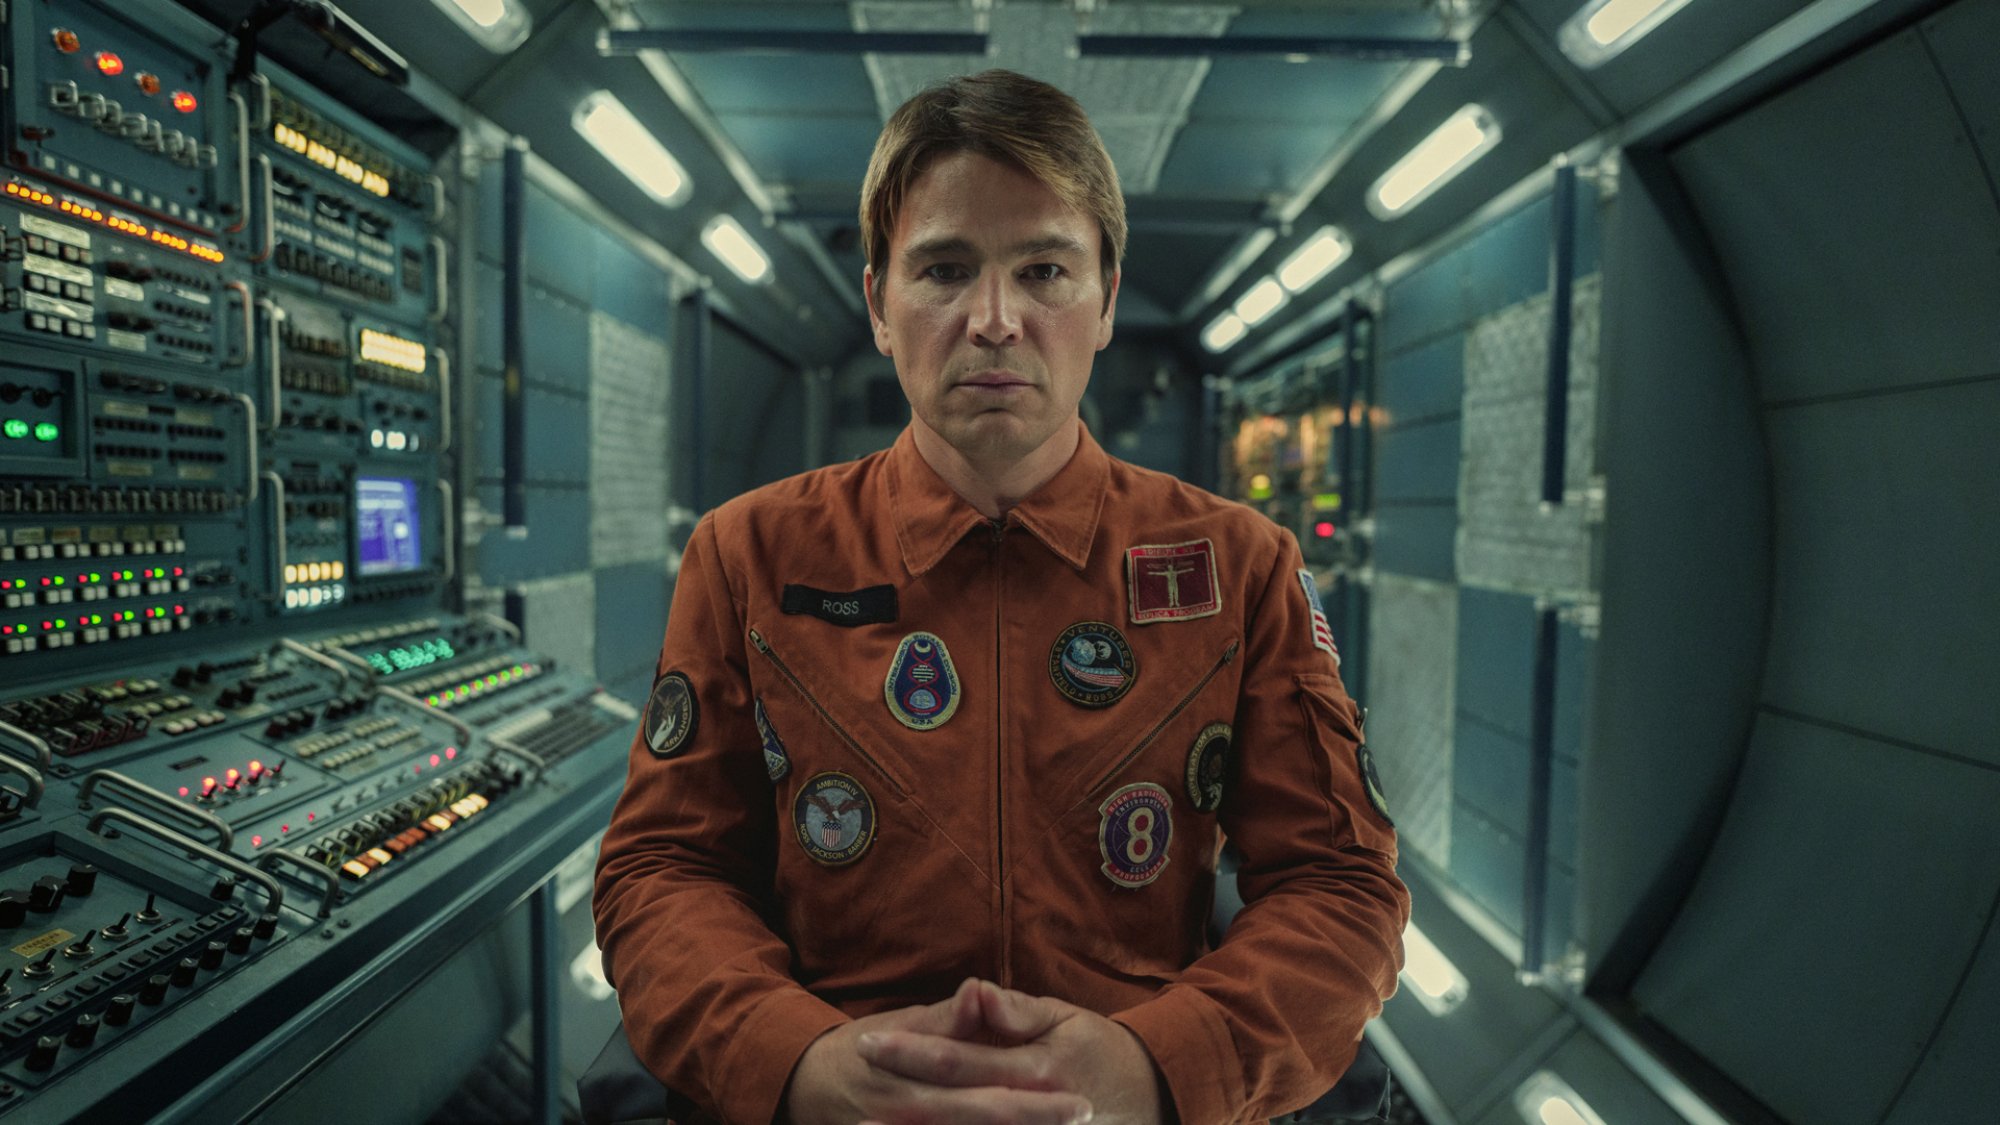 In the TV show "Black Mirror" Josh Hartnett is an astronaut sitting facing the camera with hands clasped.